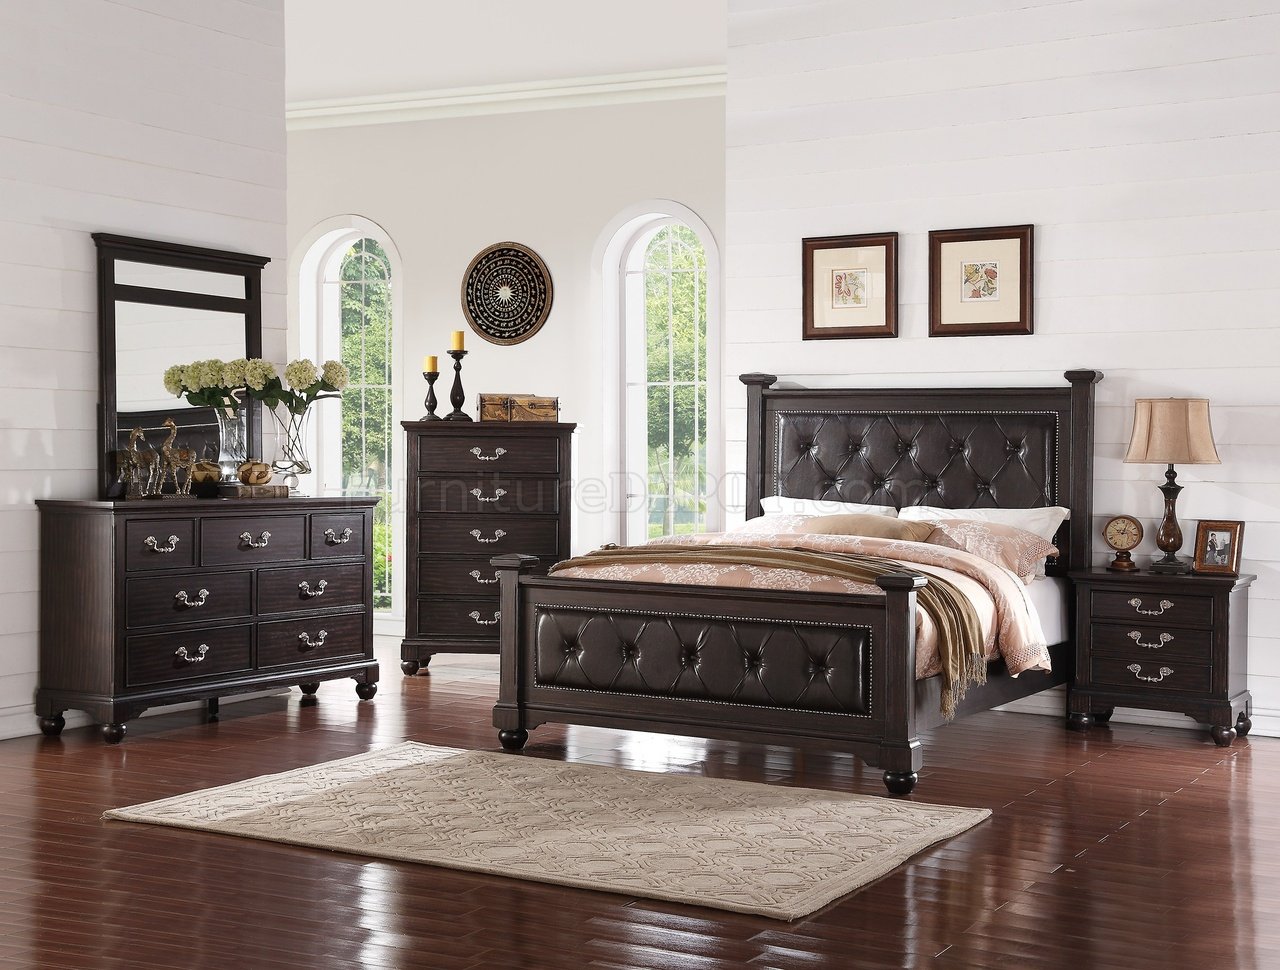 F9319 Bedroom in Espresso by Boss w/Optional Case Goods - Click Image to Close